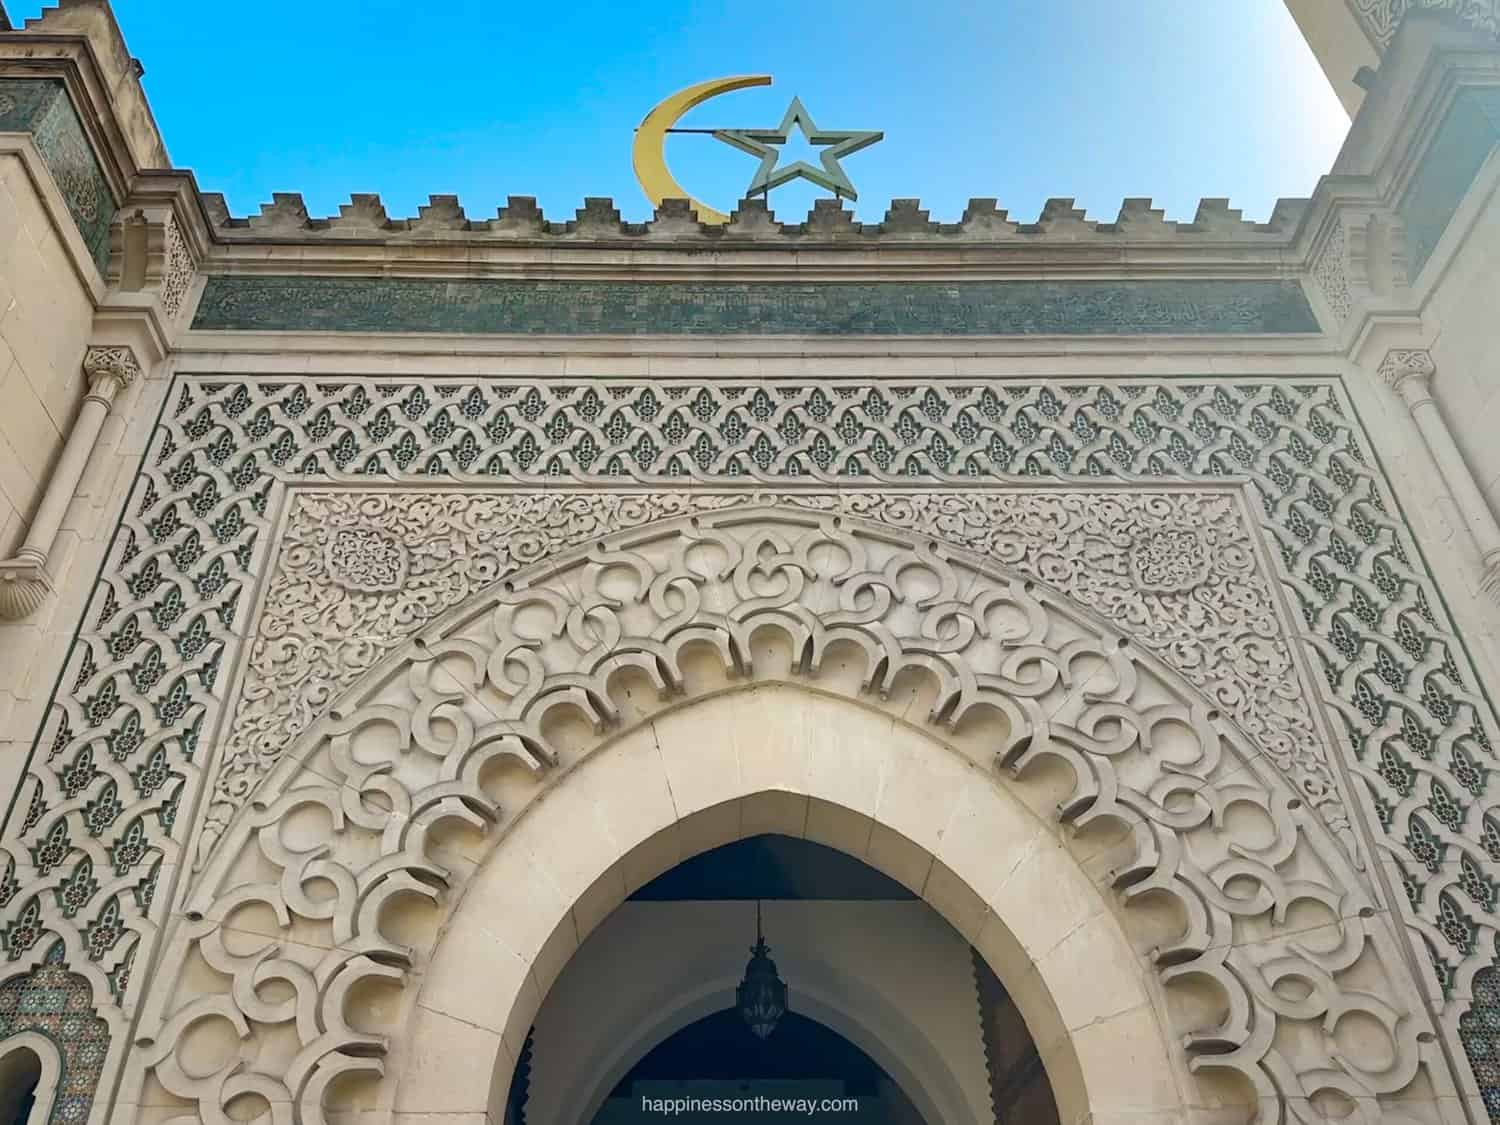 Intricately designed entryway of the La Grande Mosque, featuring elegant arches and tilework.